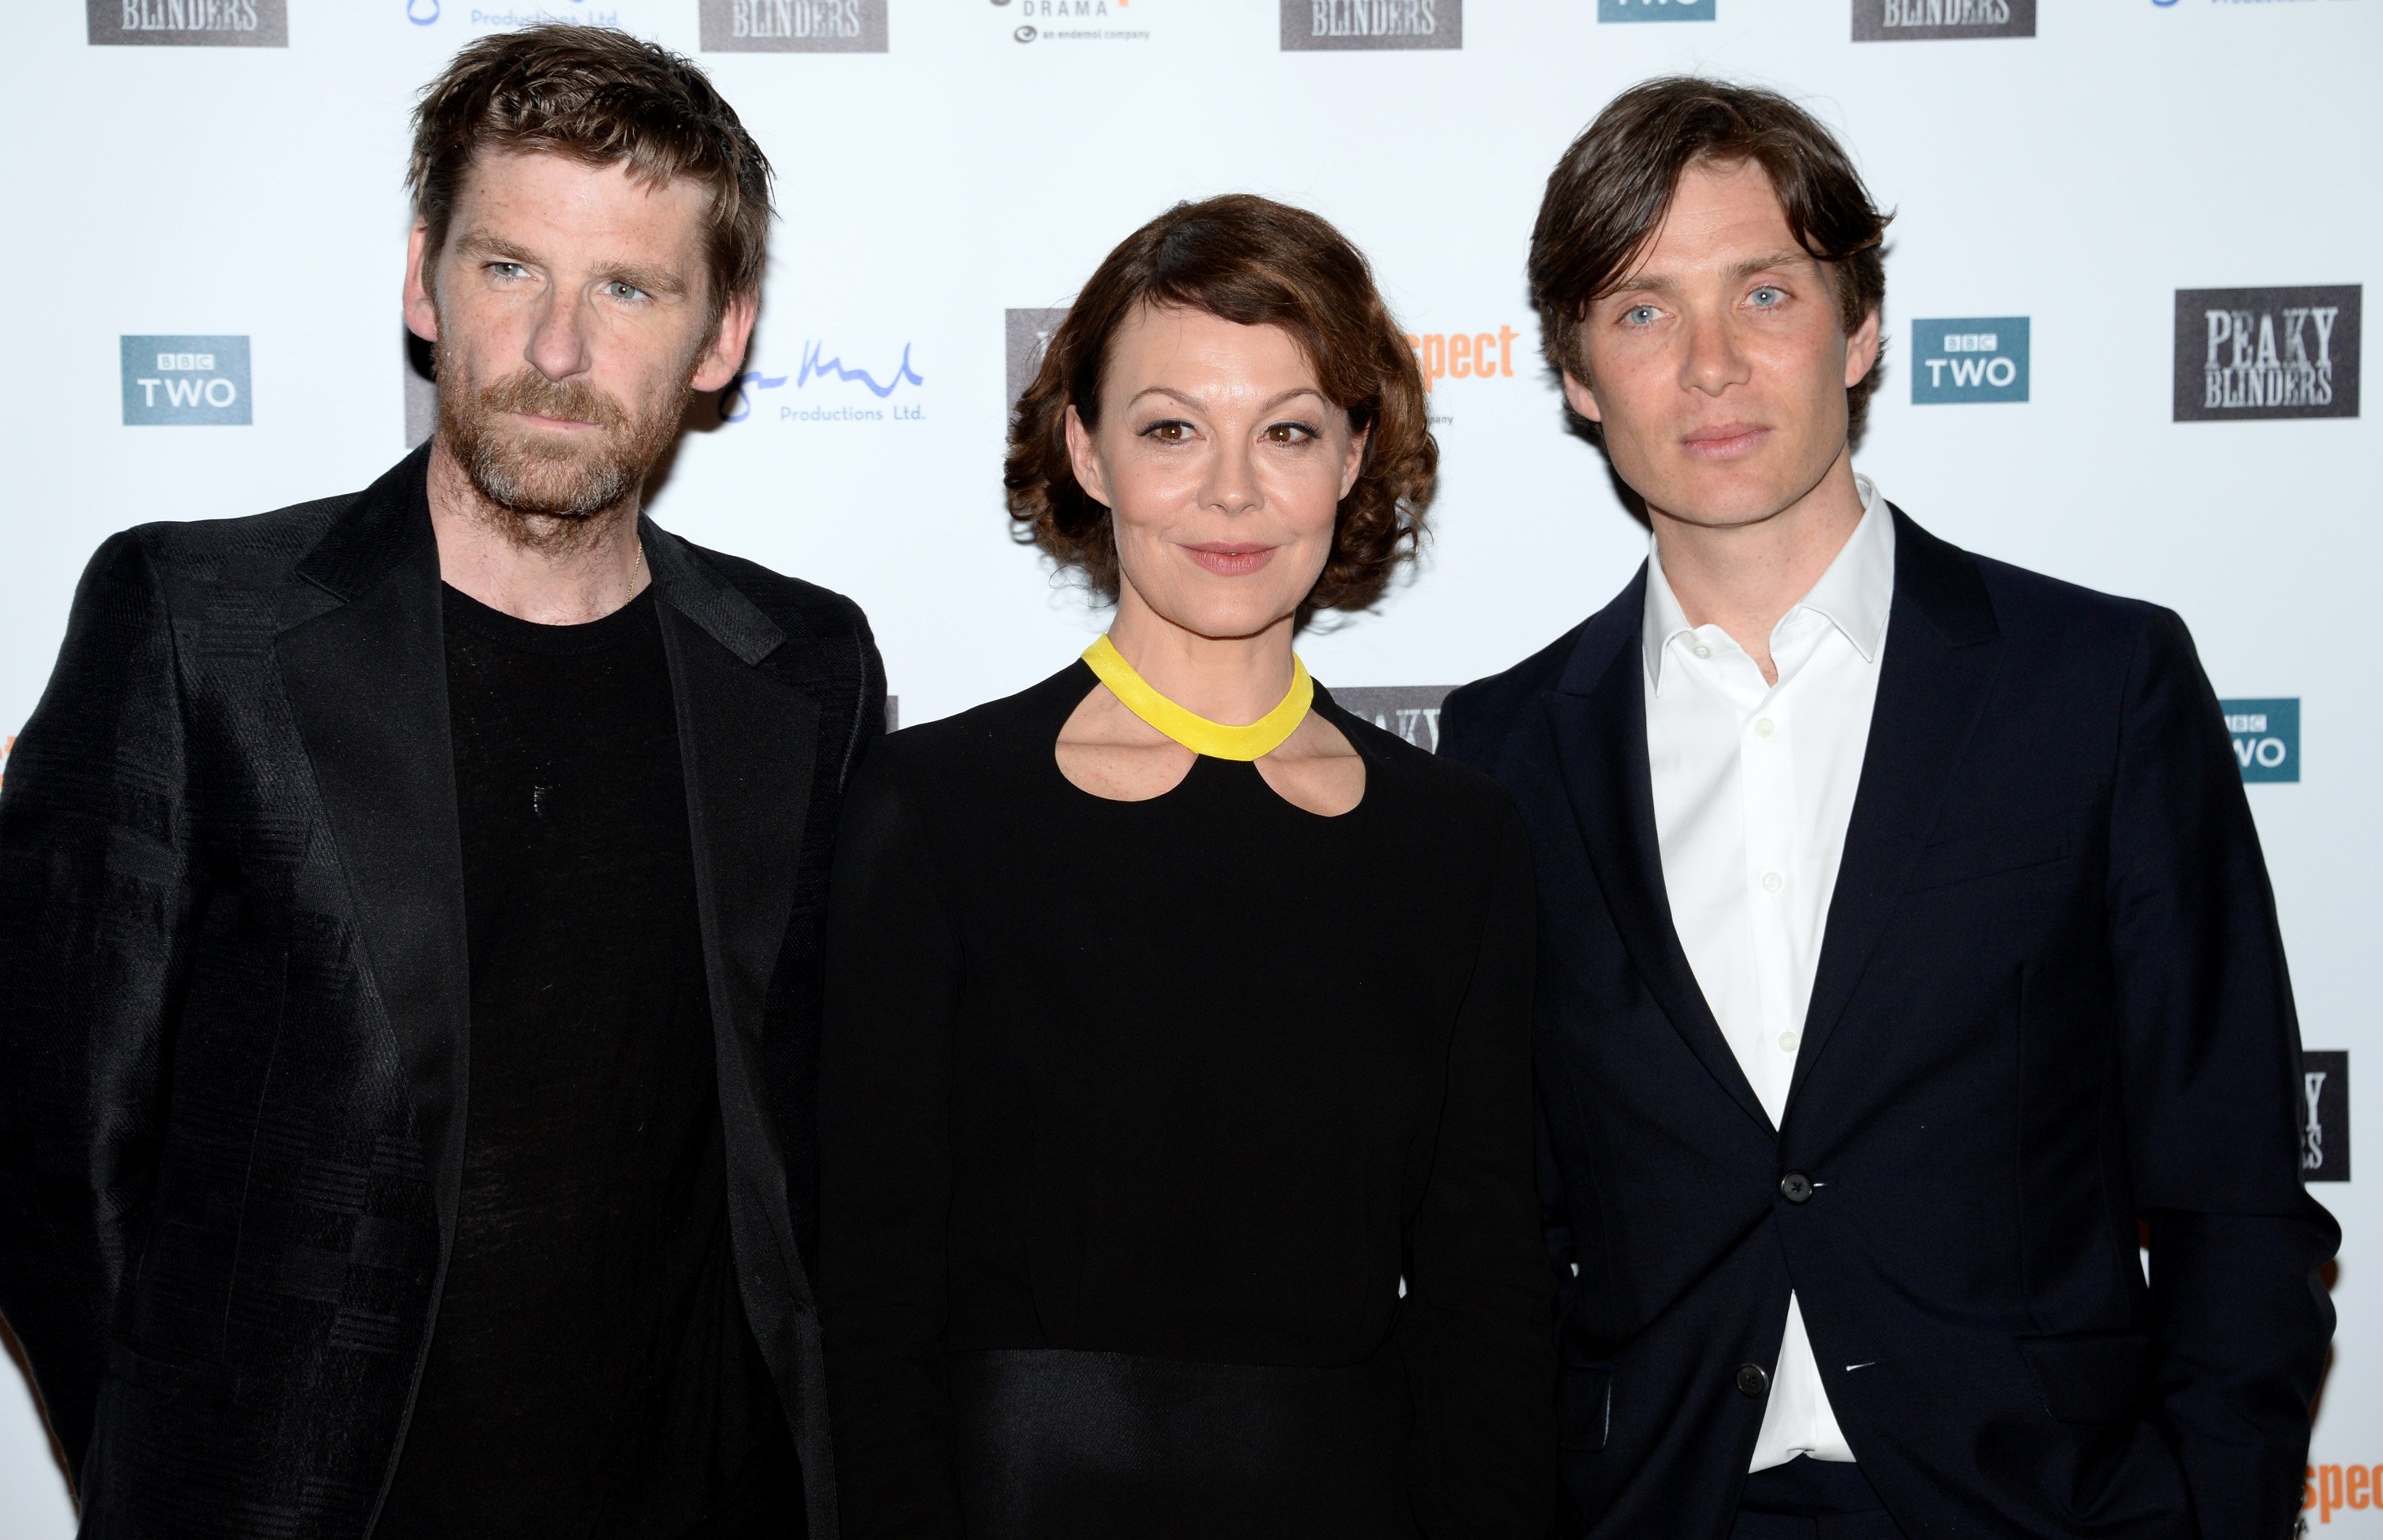 Paul Anderson, Helen McCrory, and Cillian Murphy smile for a photo at the premiere of 'Peaky Blinders' Season 3.